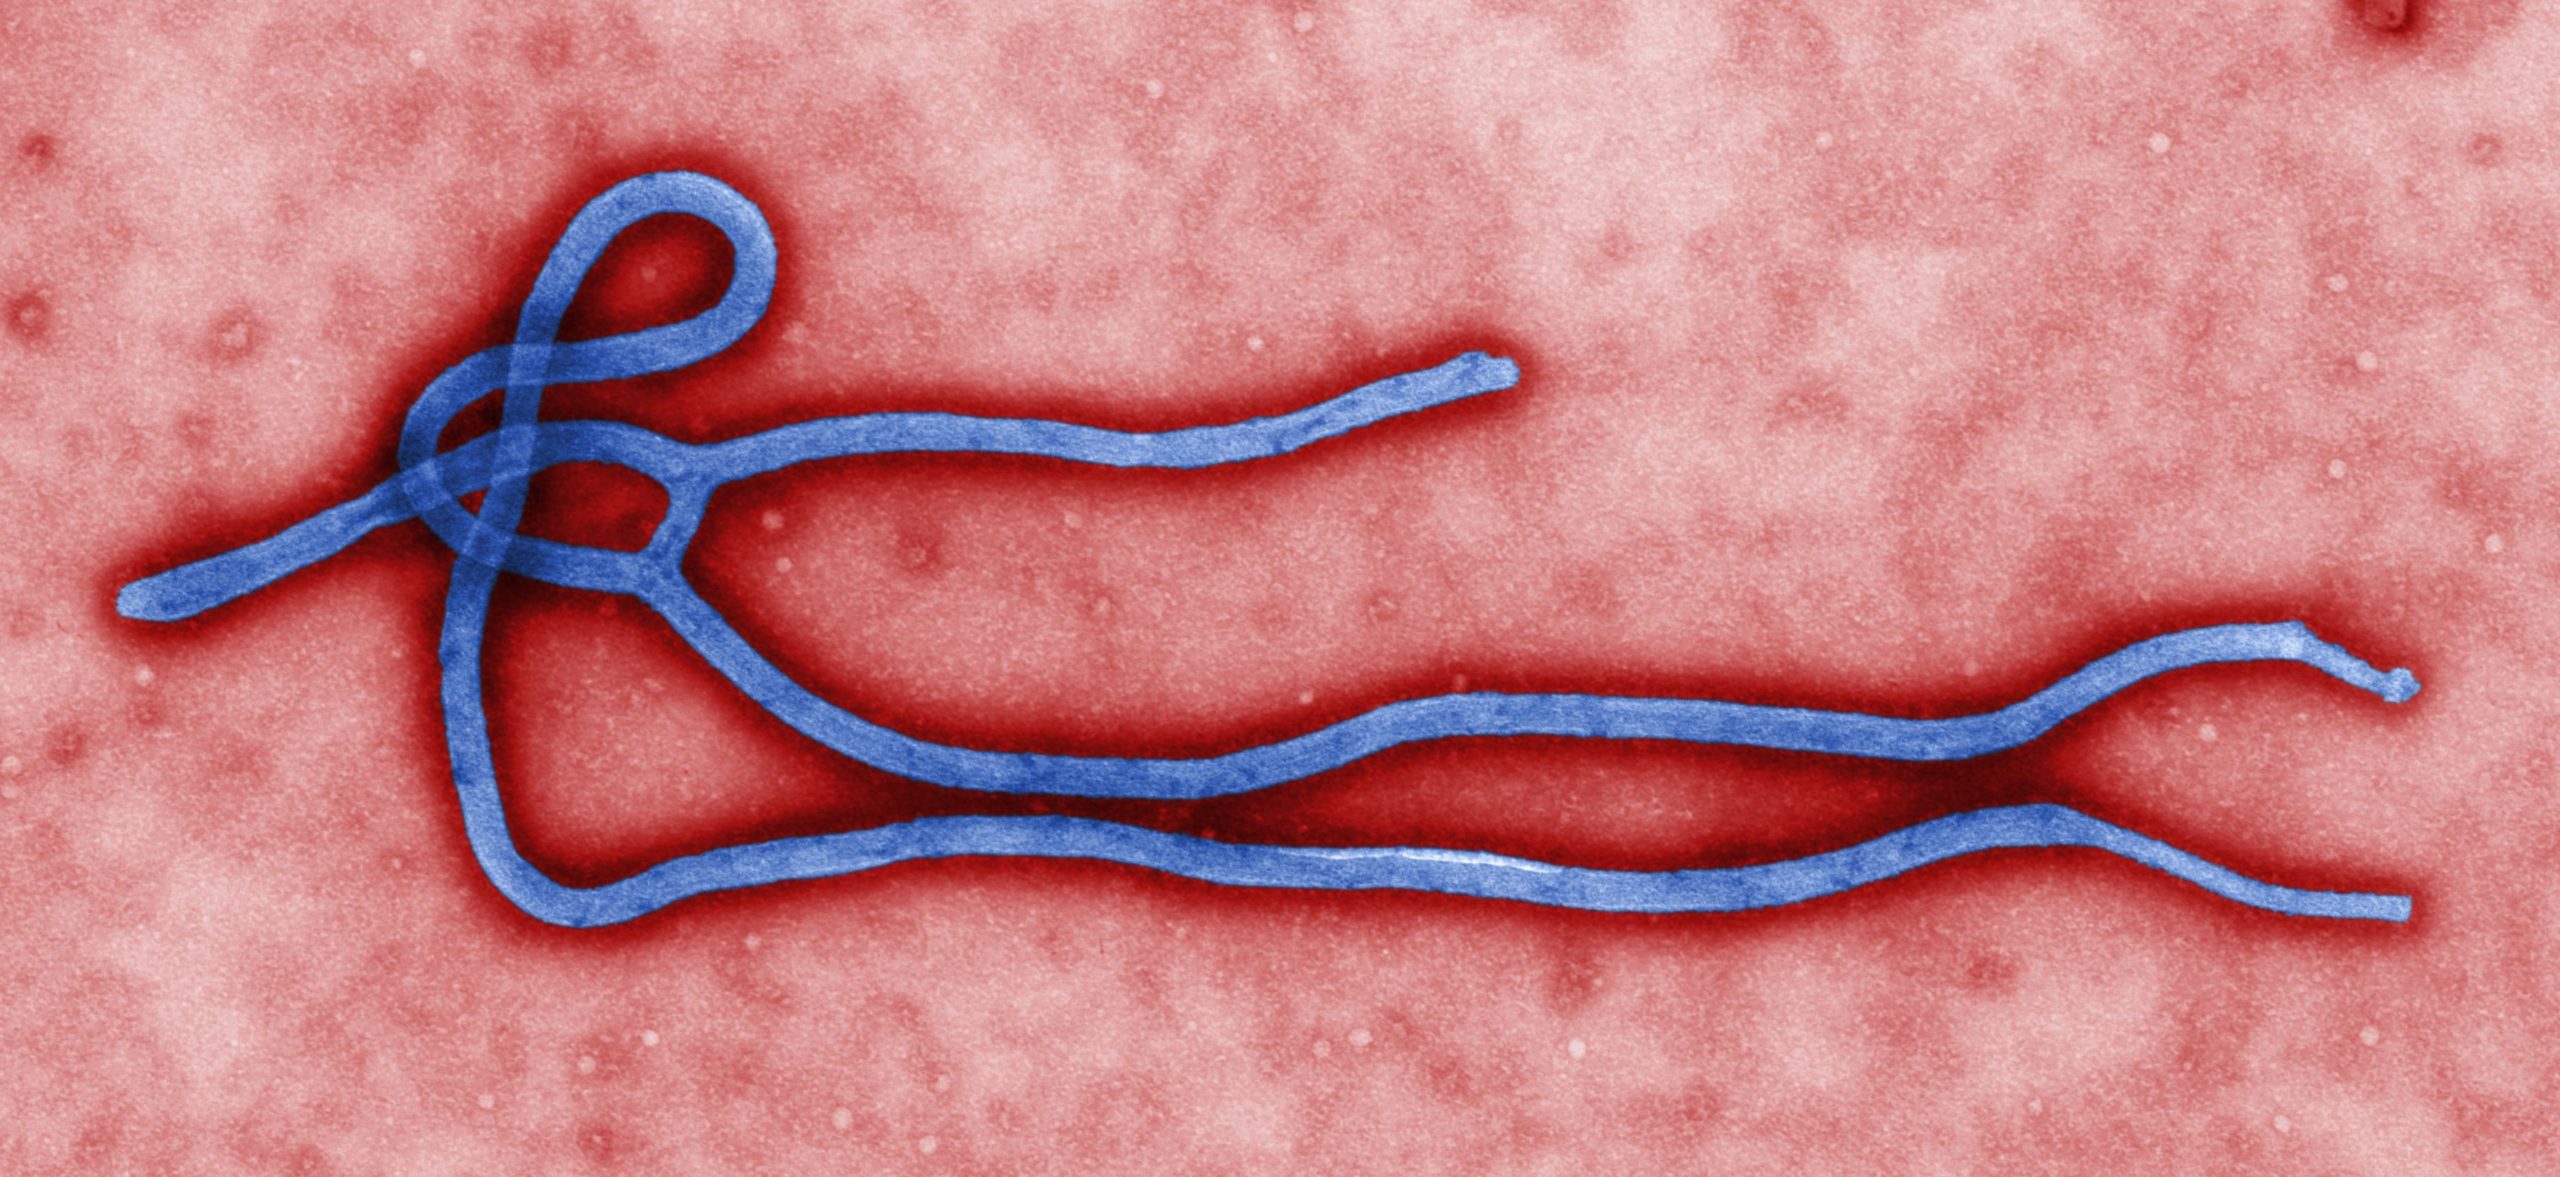 The Ebola Virus Mutated Into A Deadlier Form During The West African Epidemic